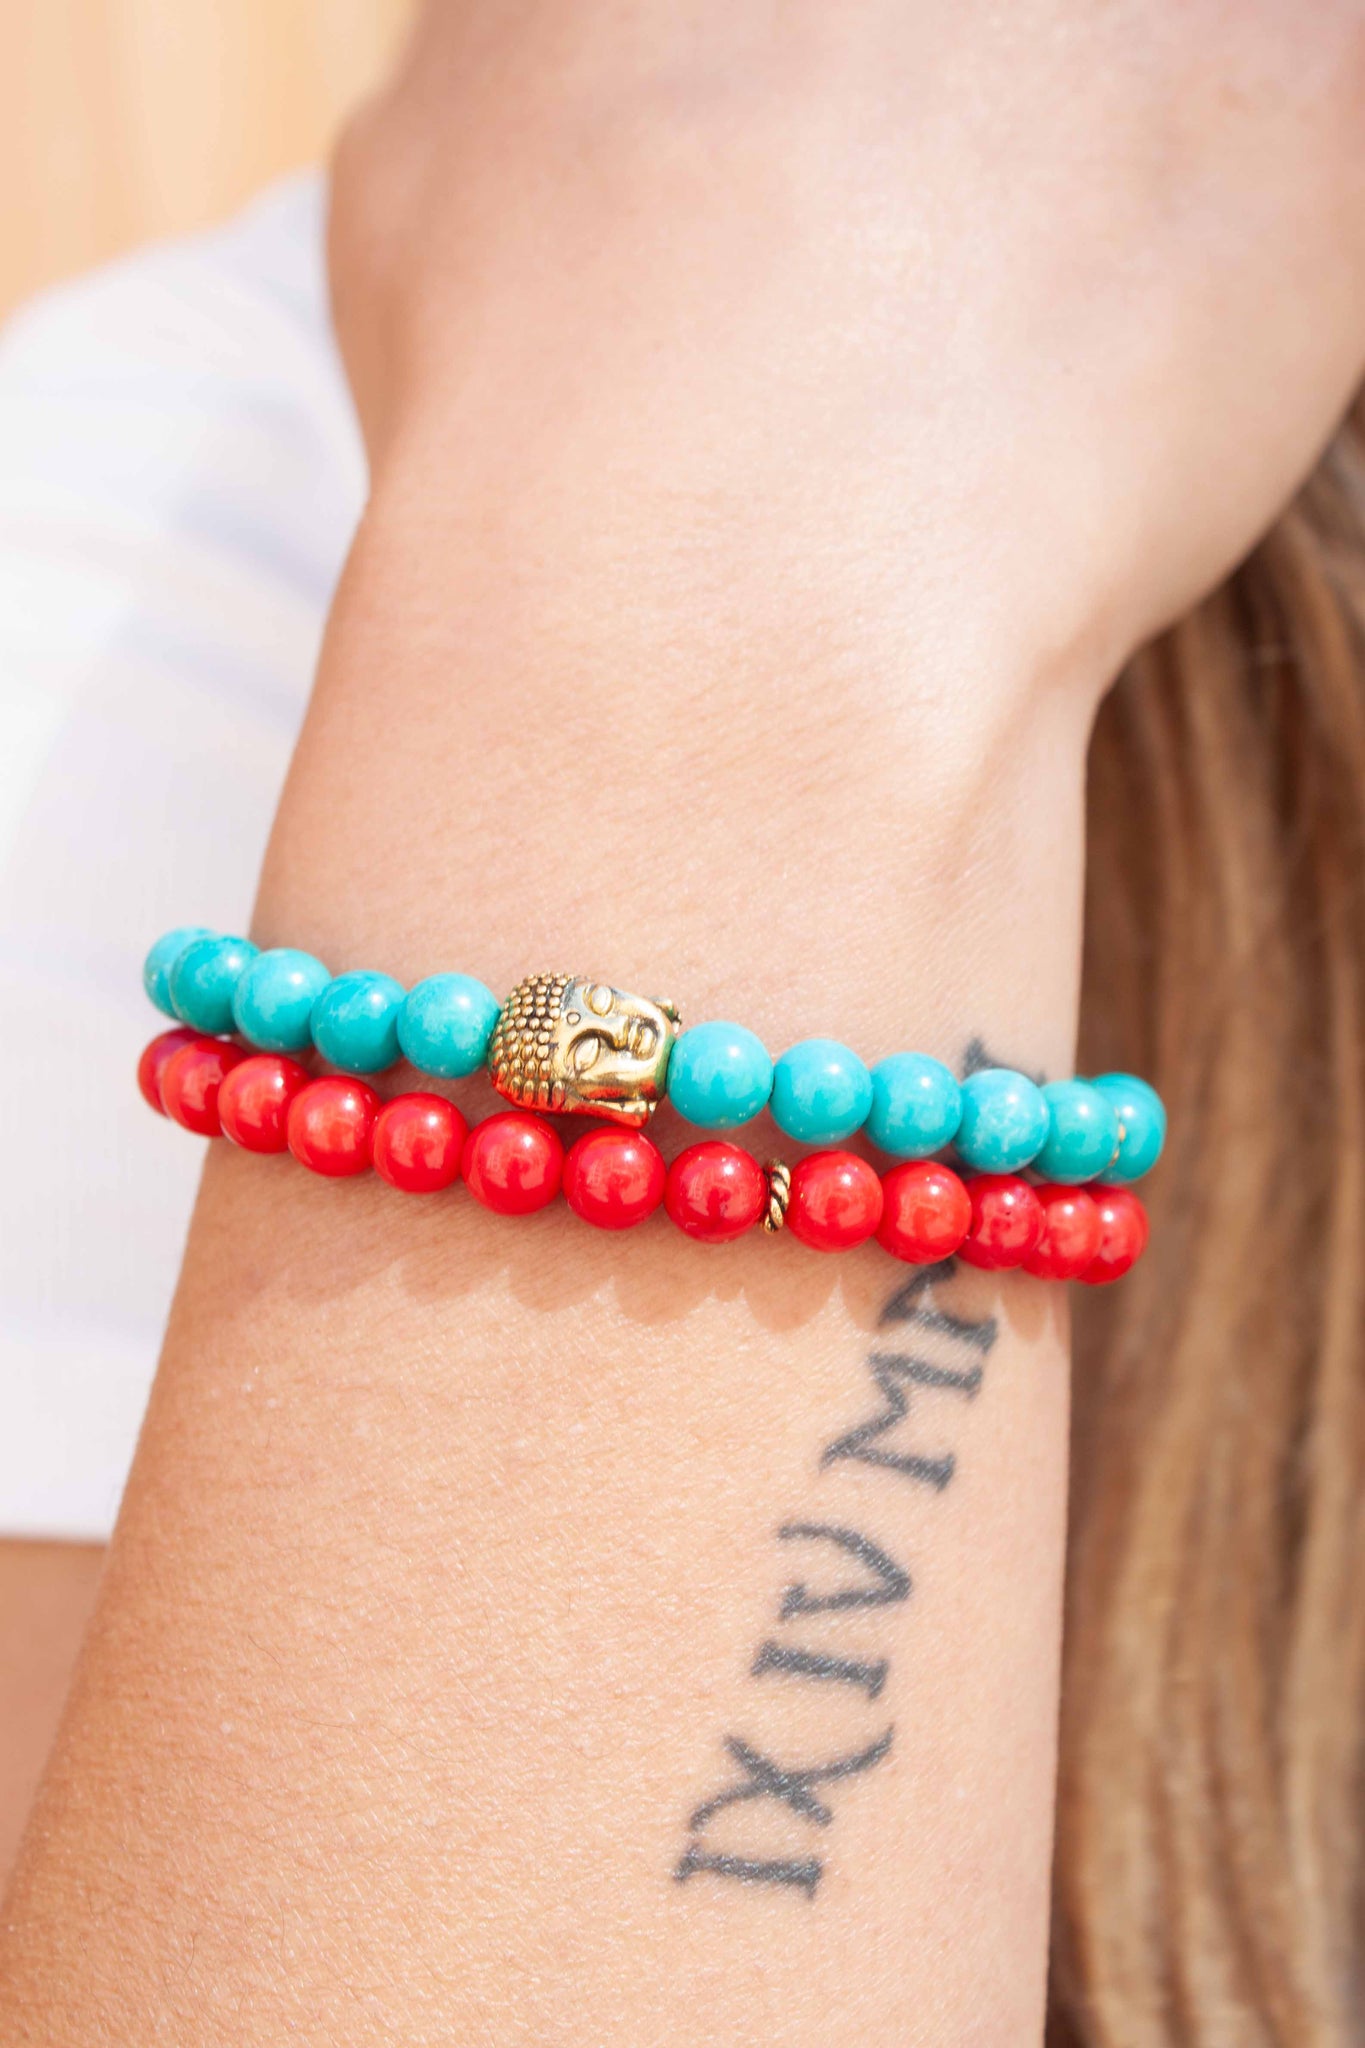 Our summer version of our best-selling buddha bracelet stack! Coral and turquoise complement each other beautifully in this fun yet soothing wristlet. Two 7 inch bracelets made with synthetic* turquoise & coral beads and brass buddha, double strung with silk elastic. Handmade in Toronto by kp jewelry co. *synthetic turquoise and coral are a cost efficient and sustainable alternative to the real thing. 